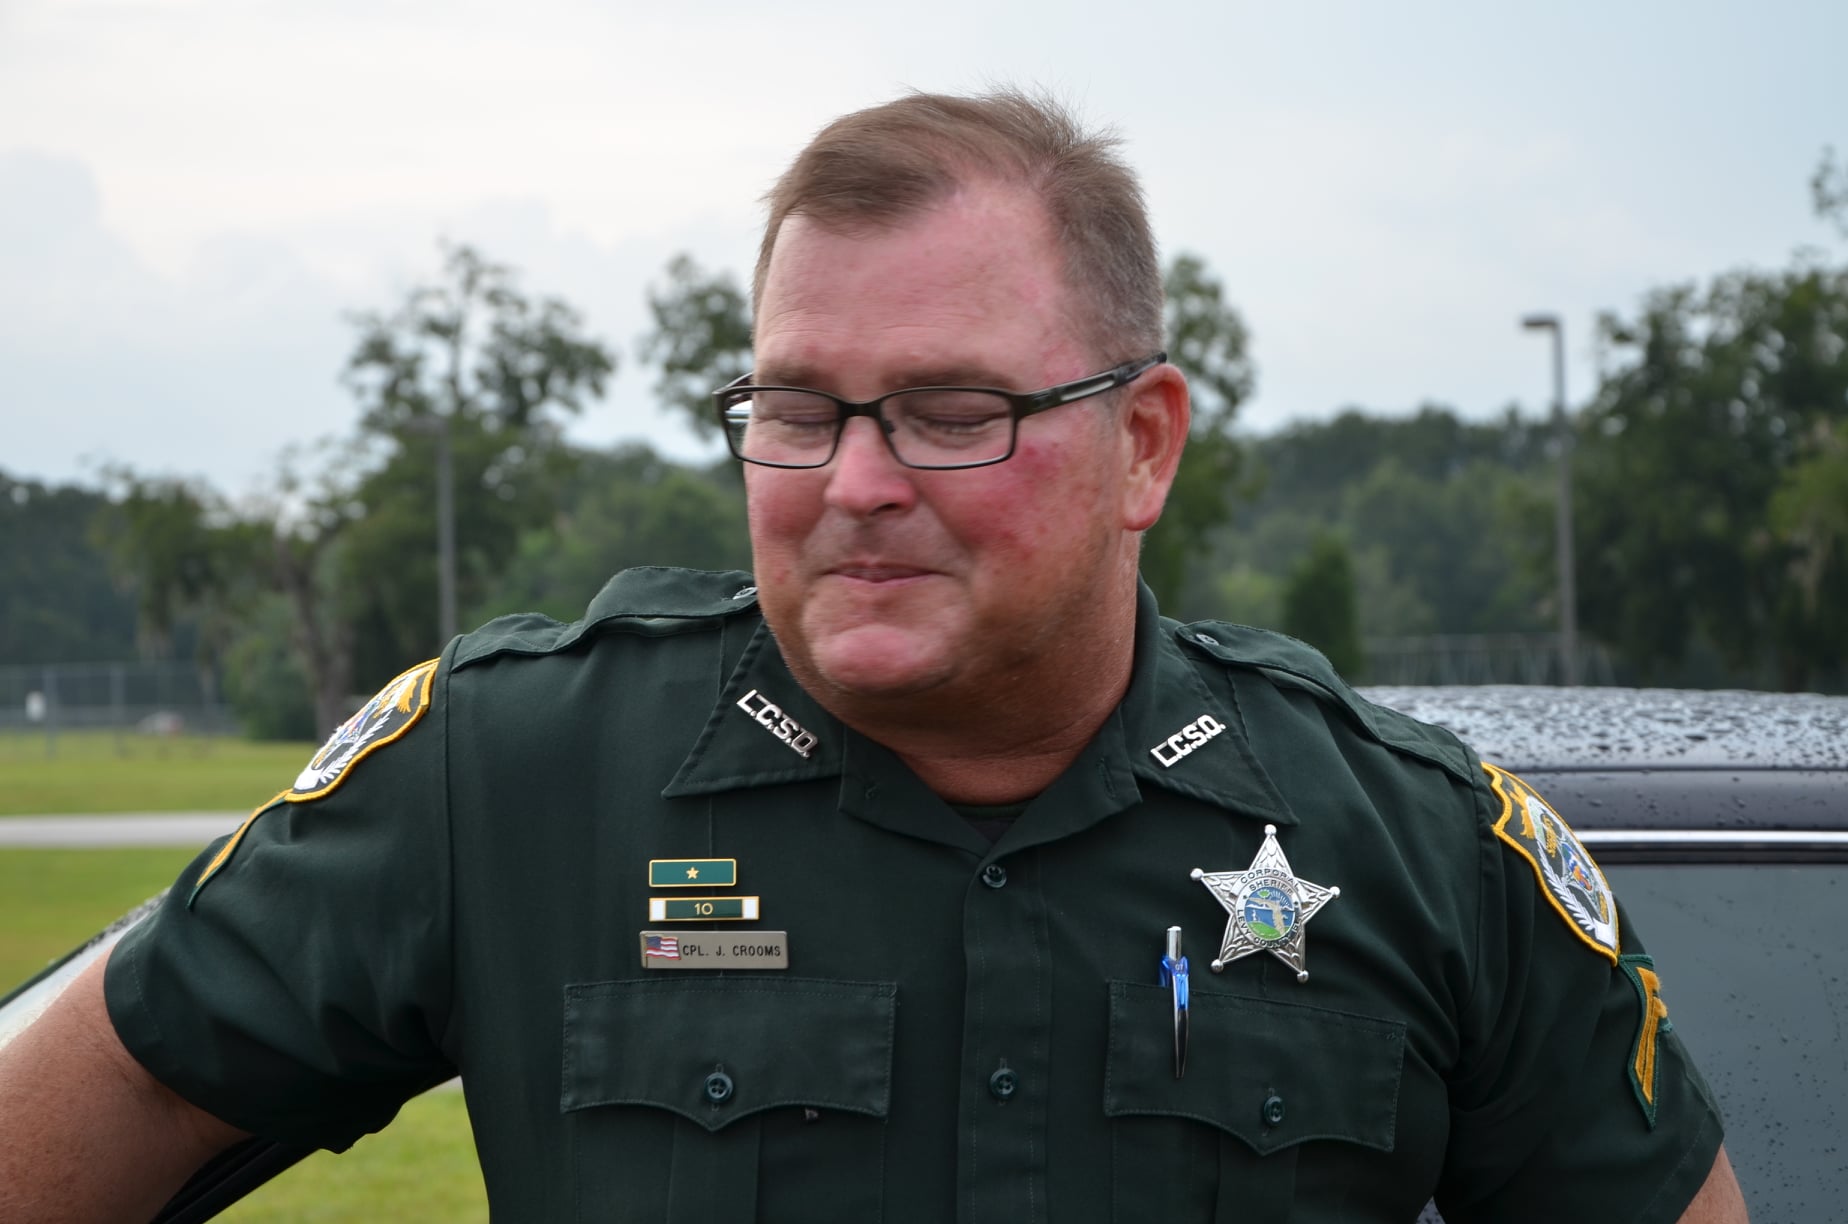 Levy County Sheriff's Office announces death of former deputy